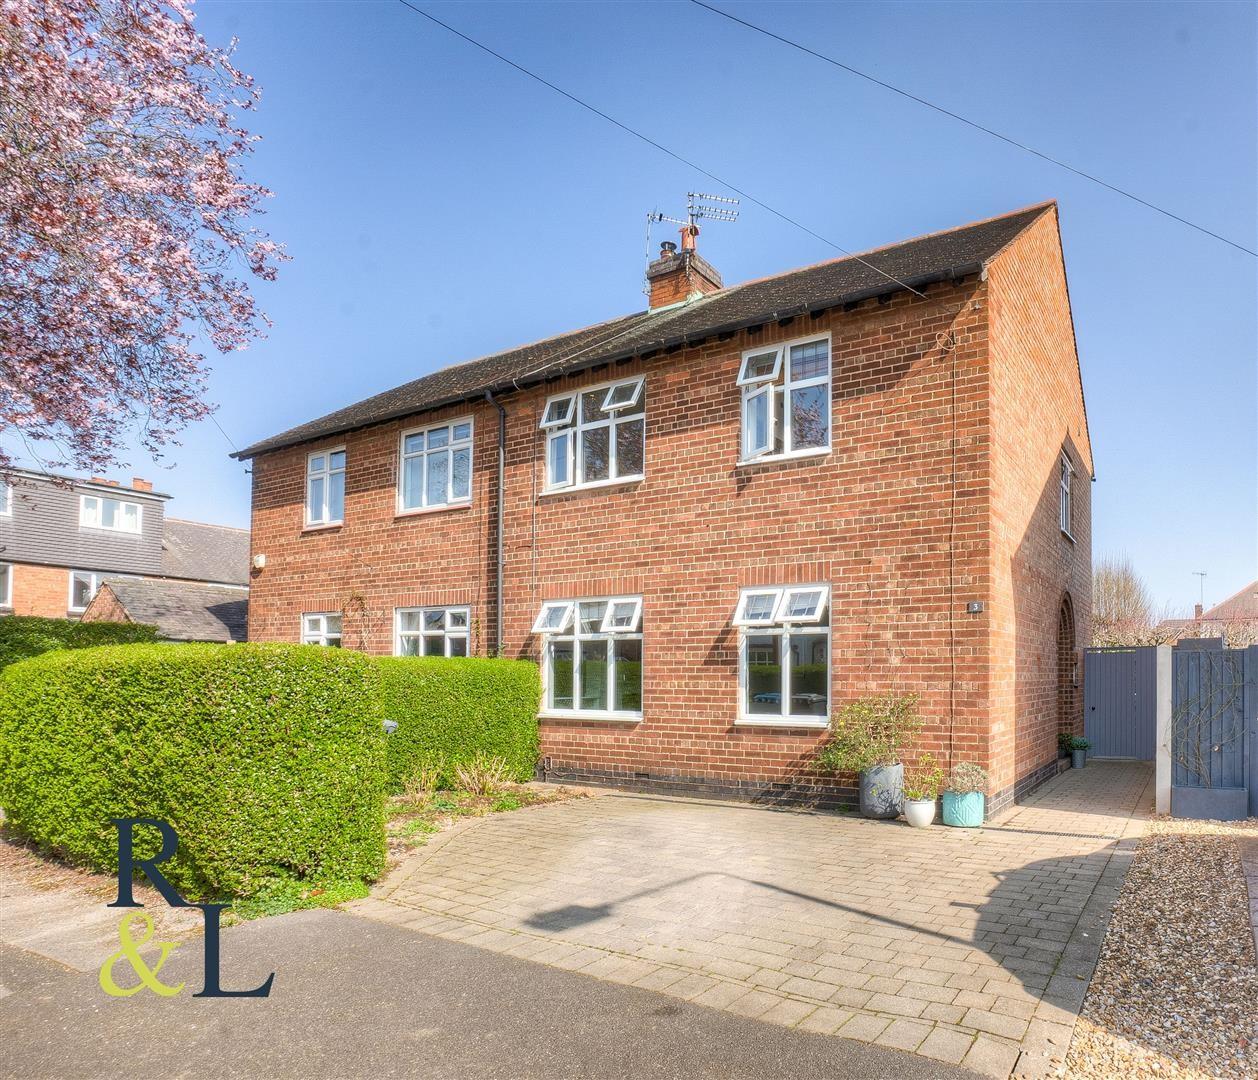 Property image for Willoughby Road, West Bridgford, Nottingham